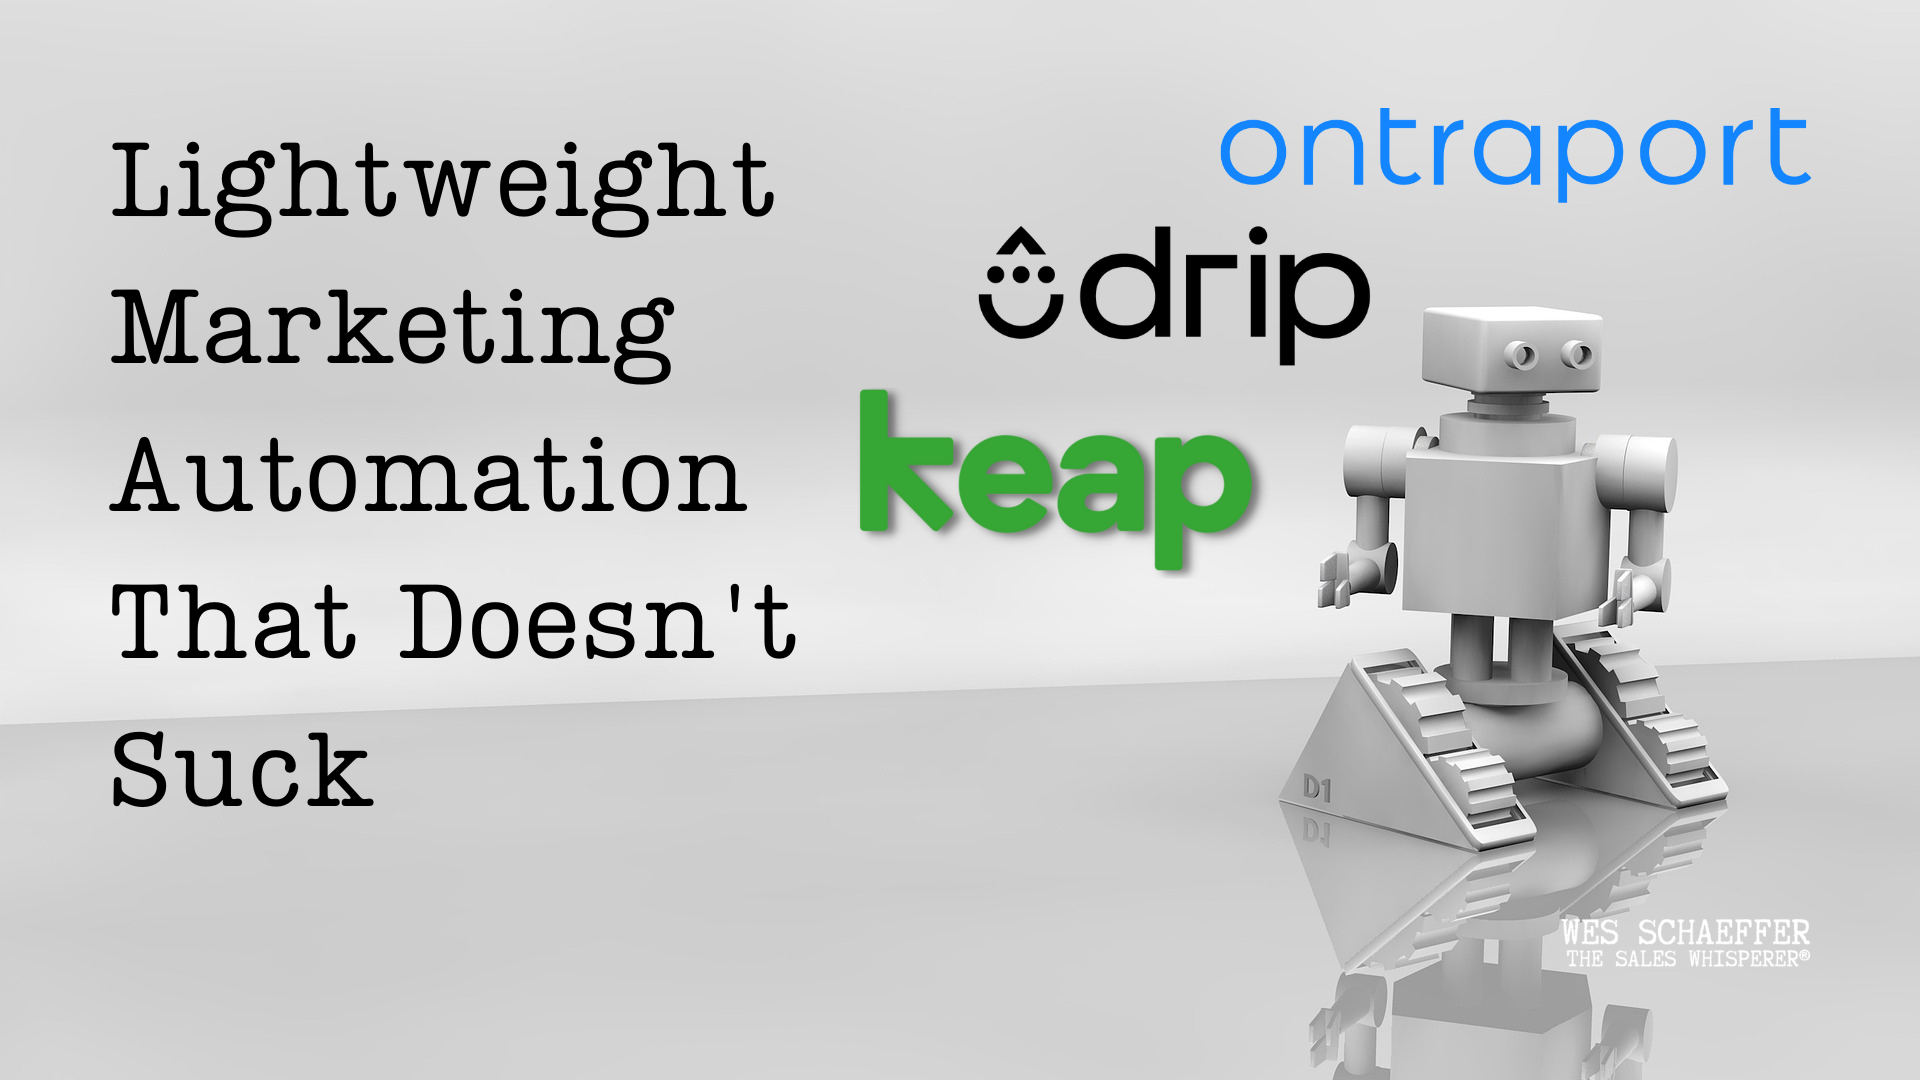 Let's look at Leadpages Drip vs. Keap vs Ontraport for lightweight marketing automation.